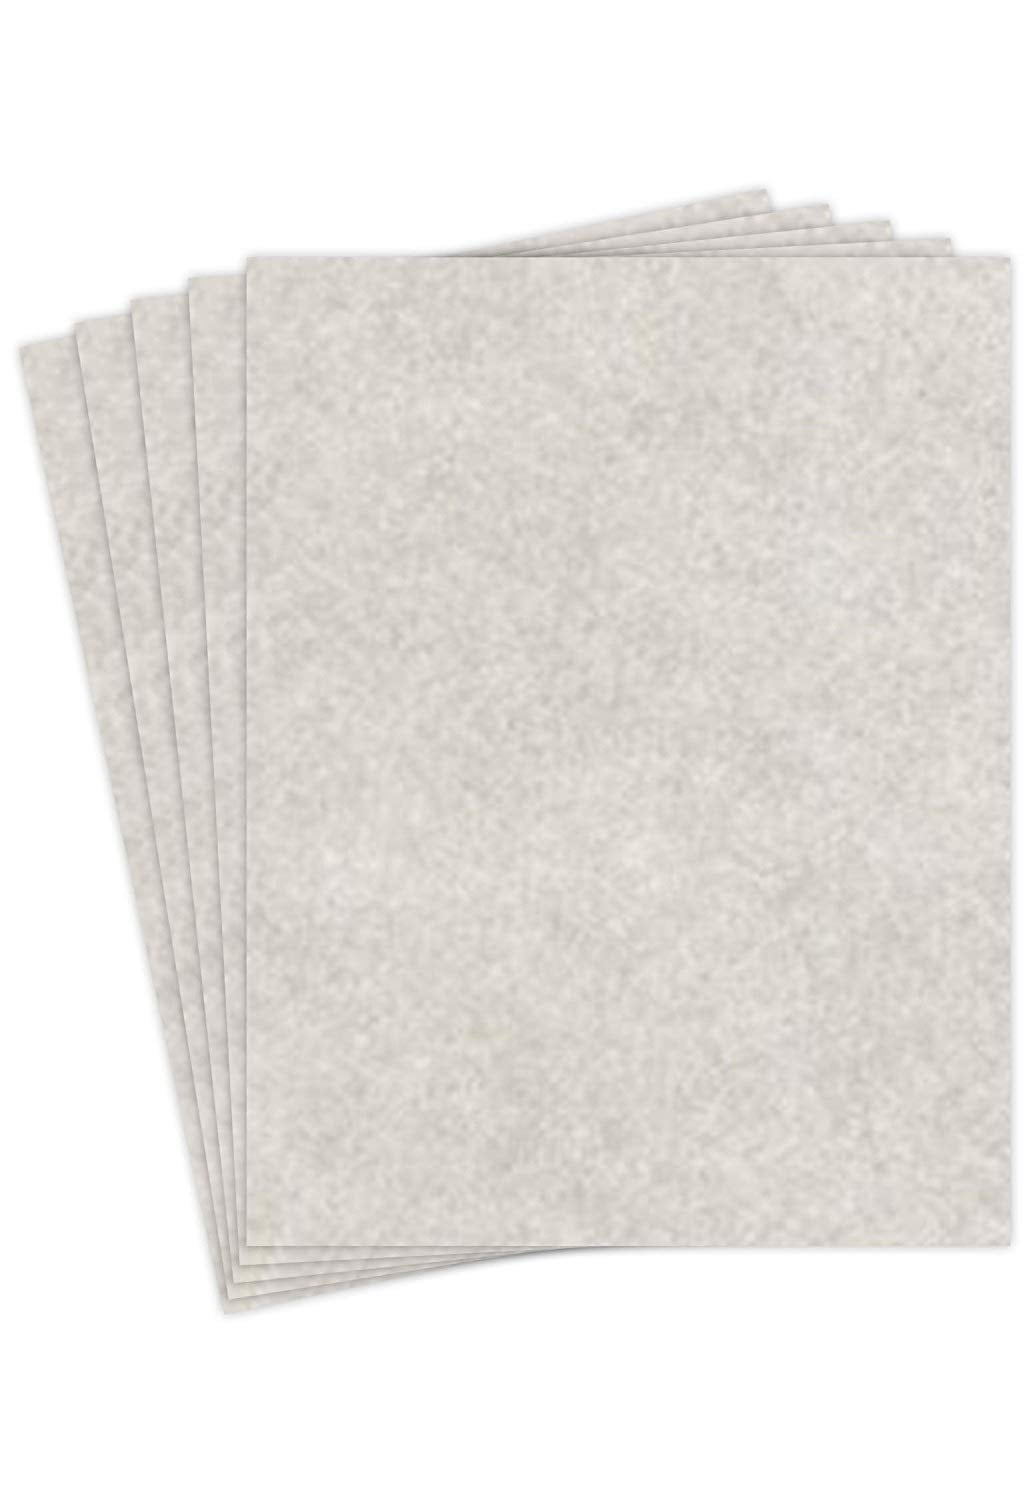 Gray Parchment Paper, 8.5 x 11 Inches, 24 lb, - 50 Sheets per Pack.